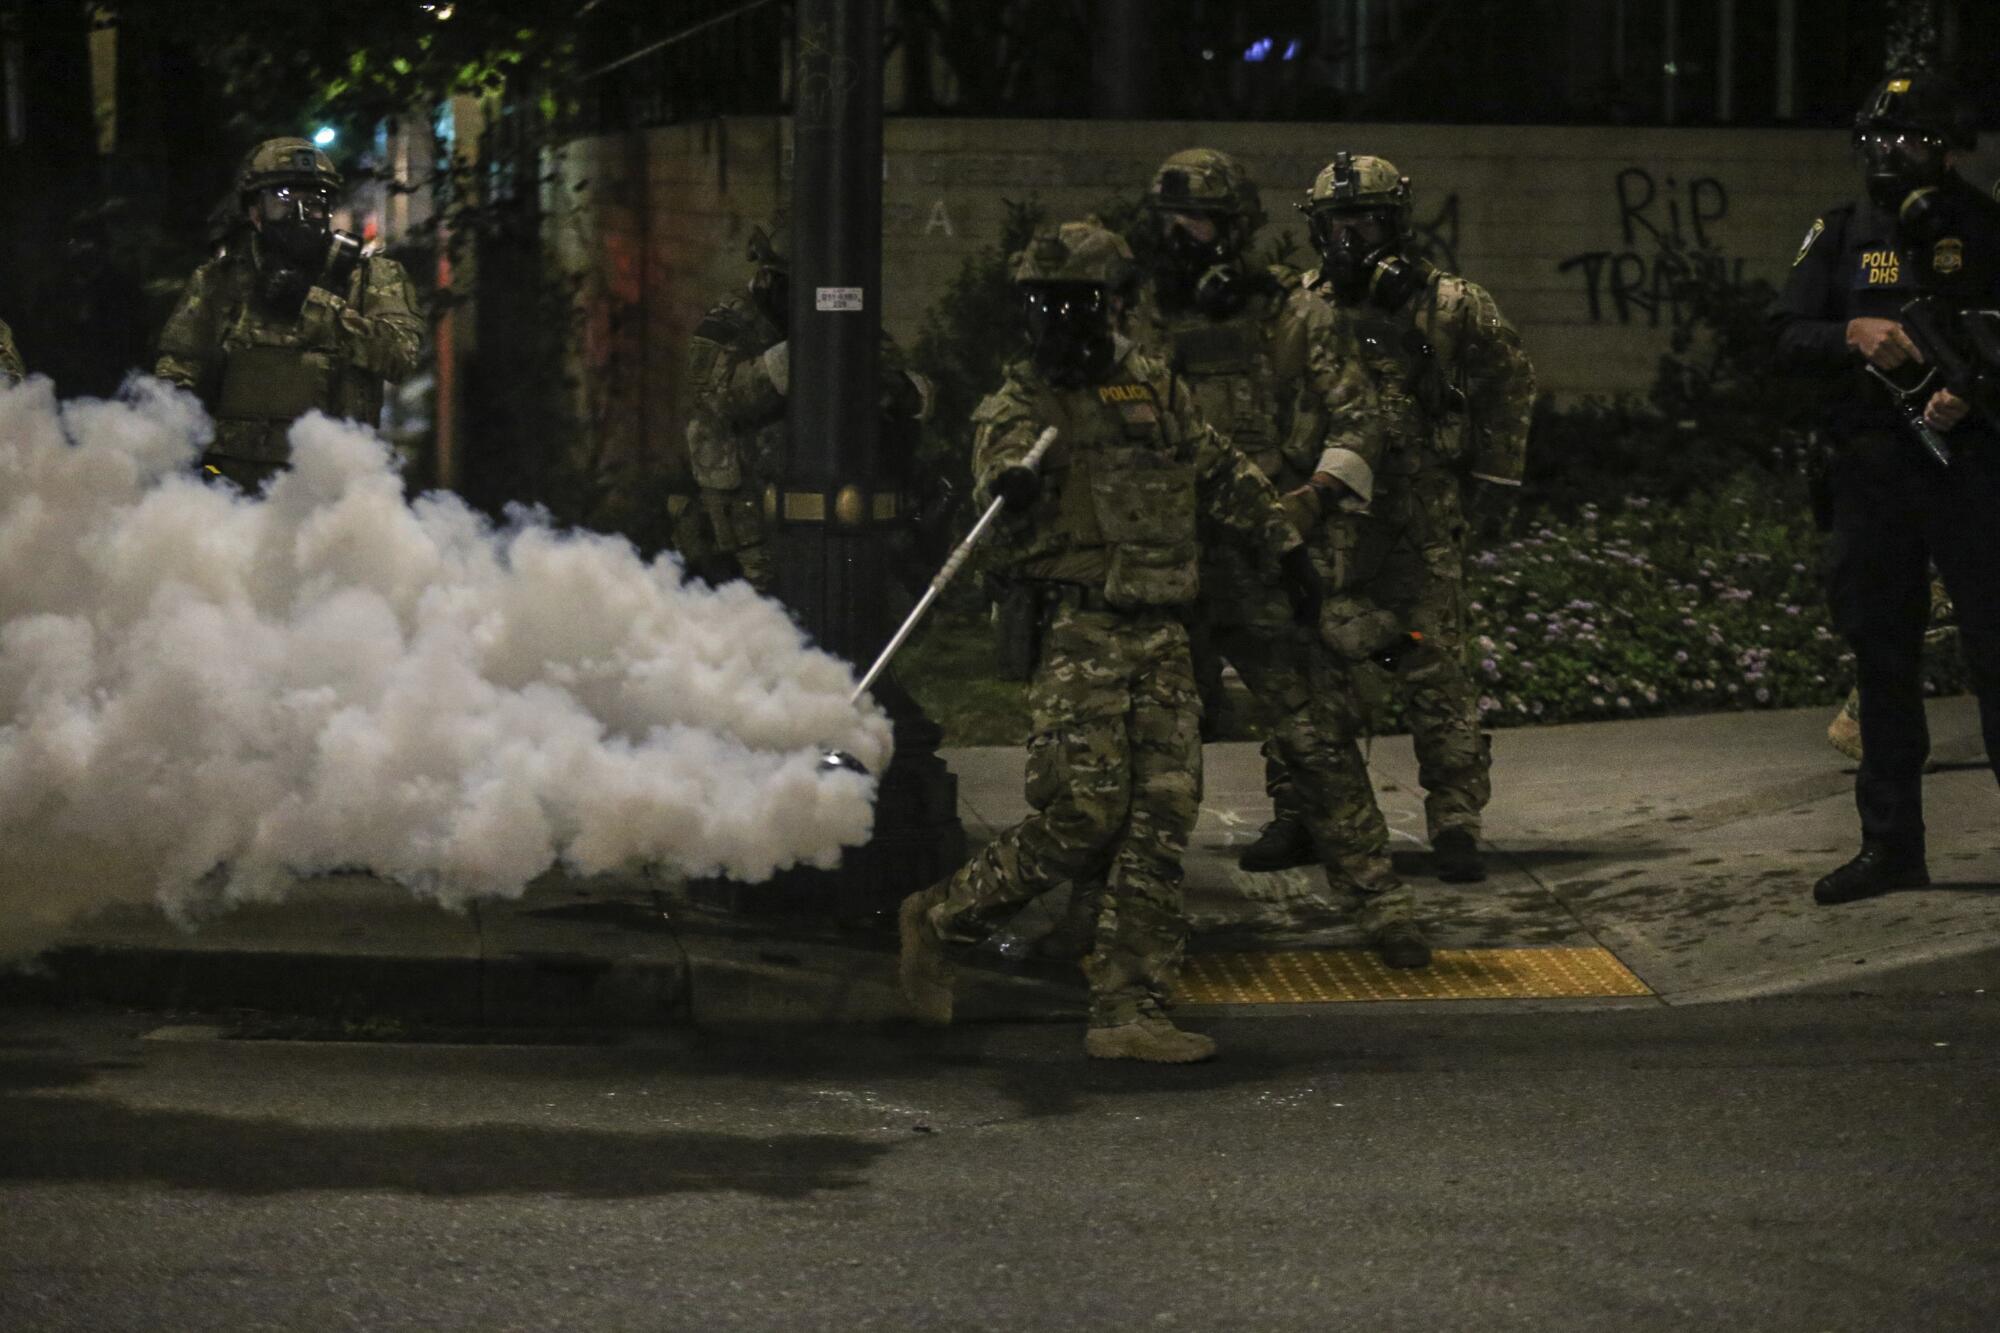 Federal agents and tear gas.